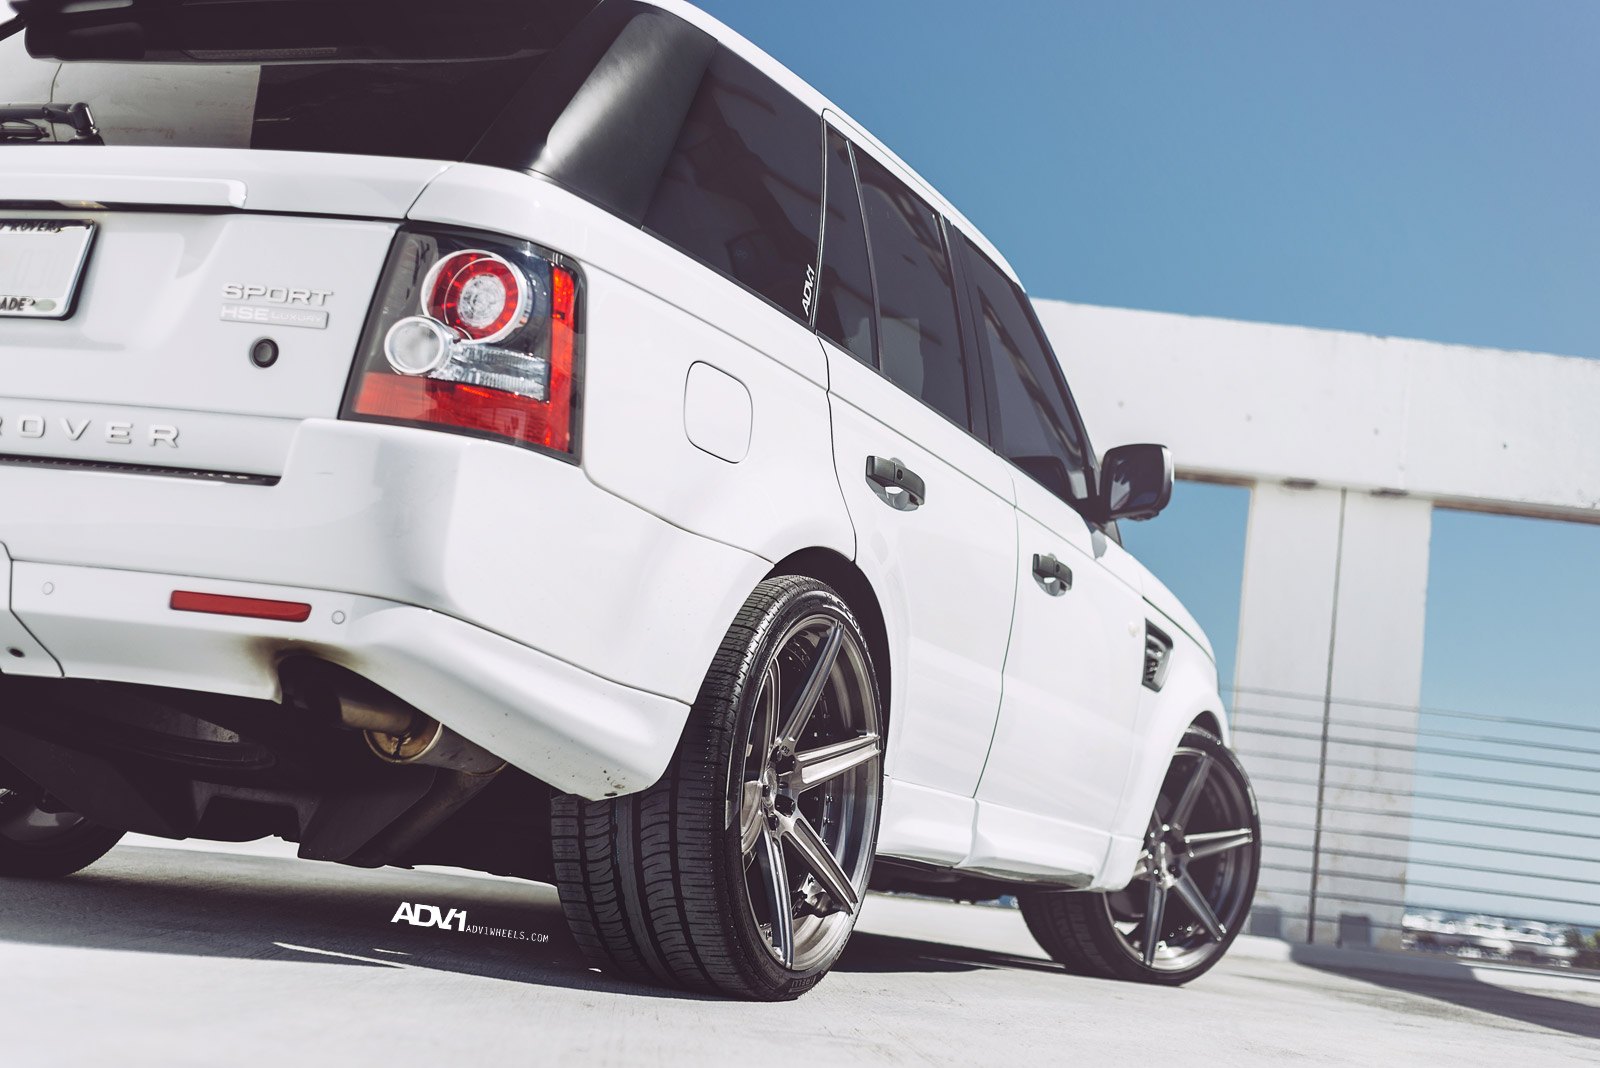 Aftermarket LED Taillights on White Range Rover Sport - Photo by ADV.1